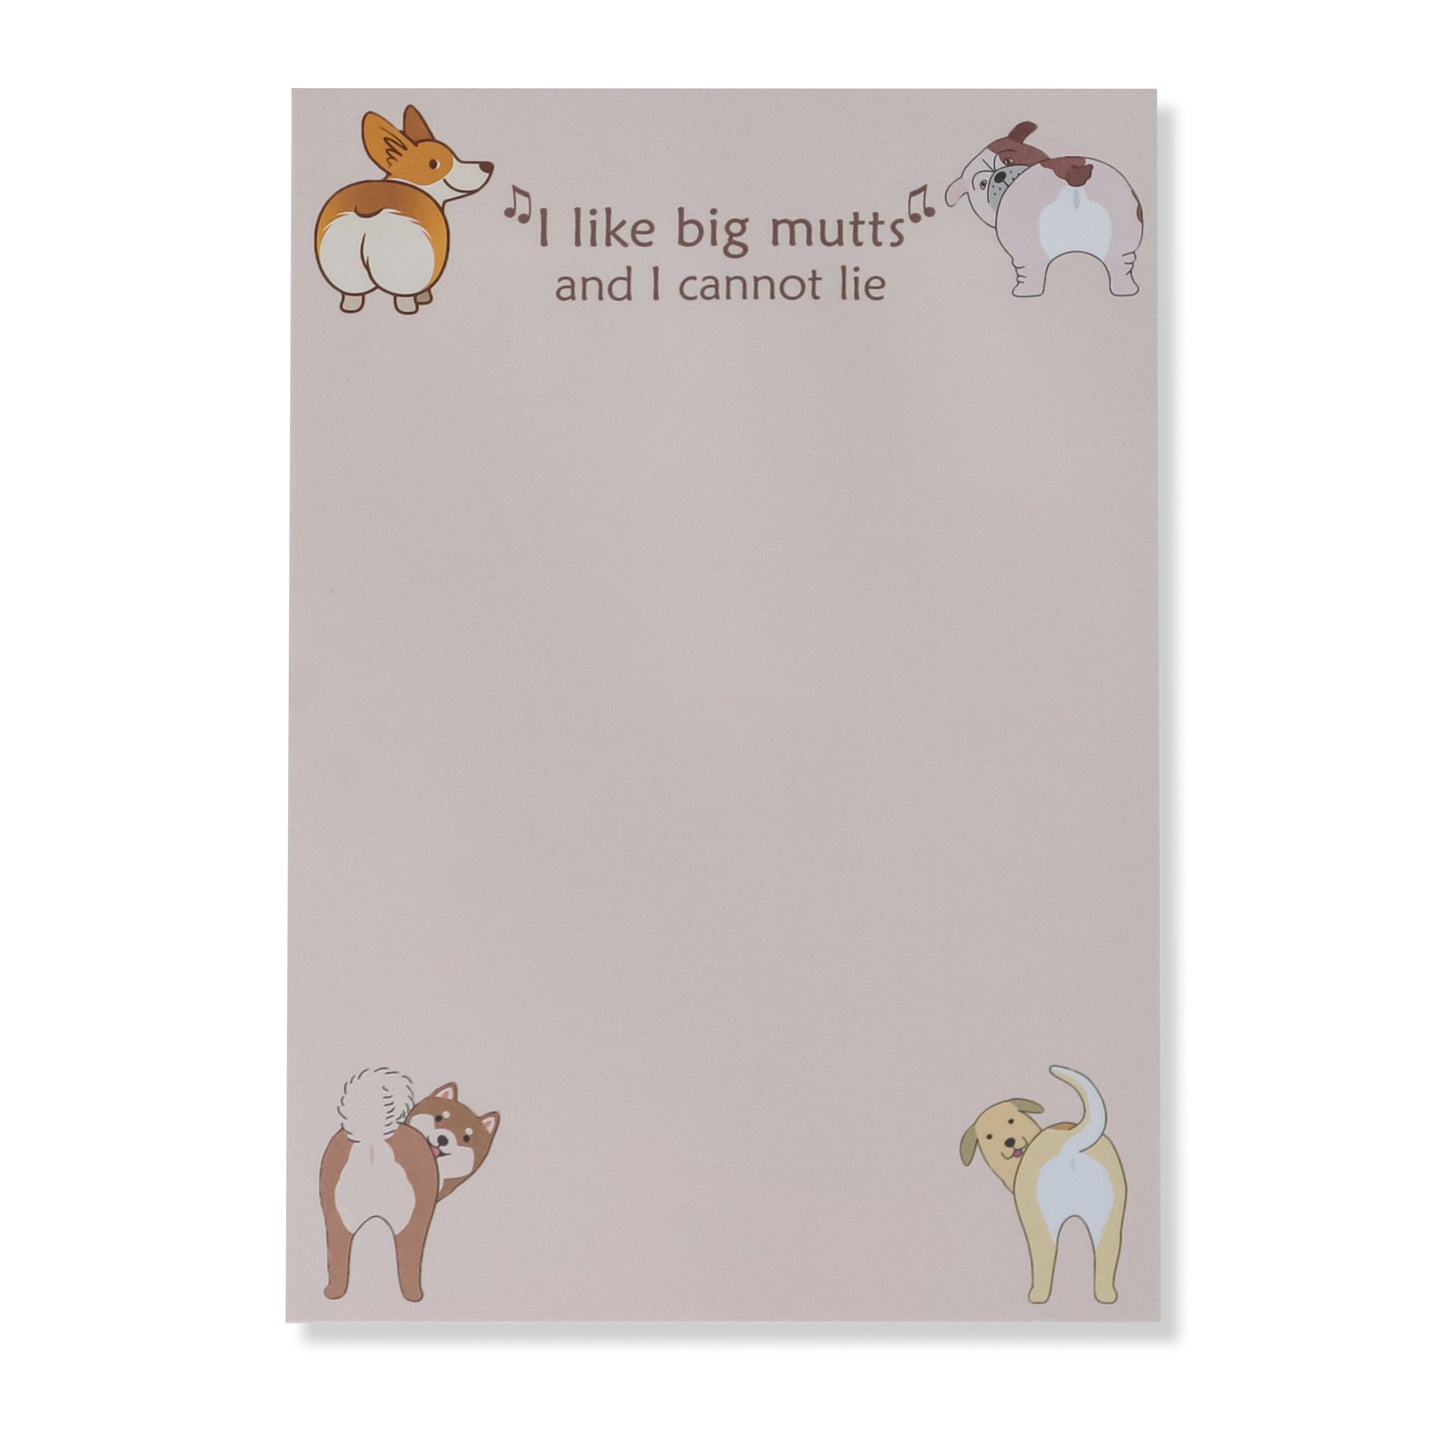 Dog Themed Notepads with Refrigerator Magnets Gift